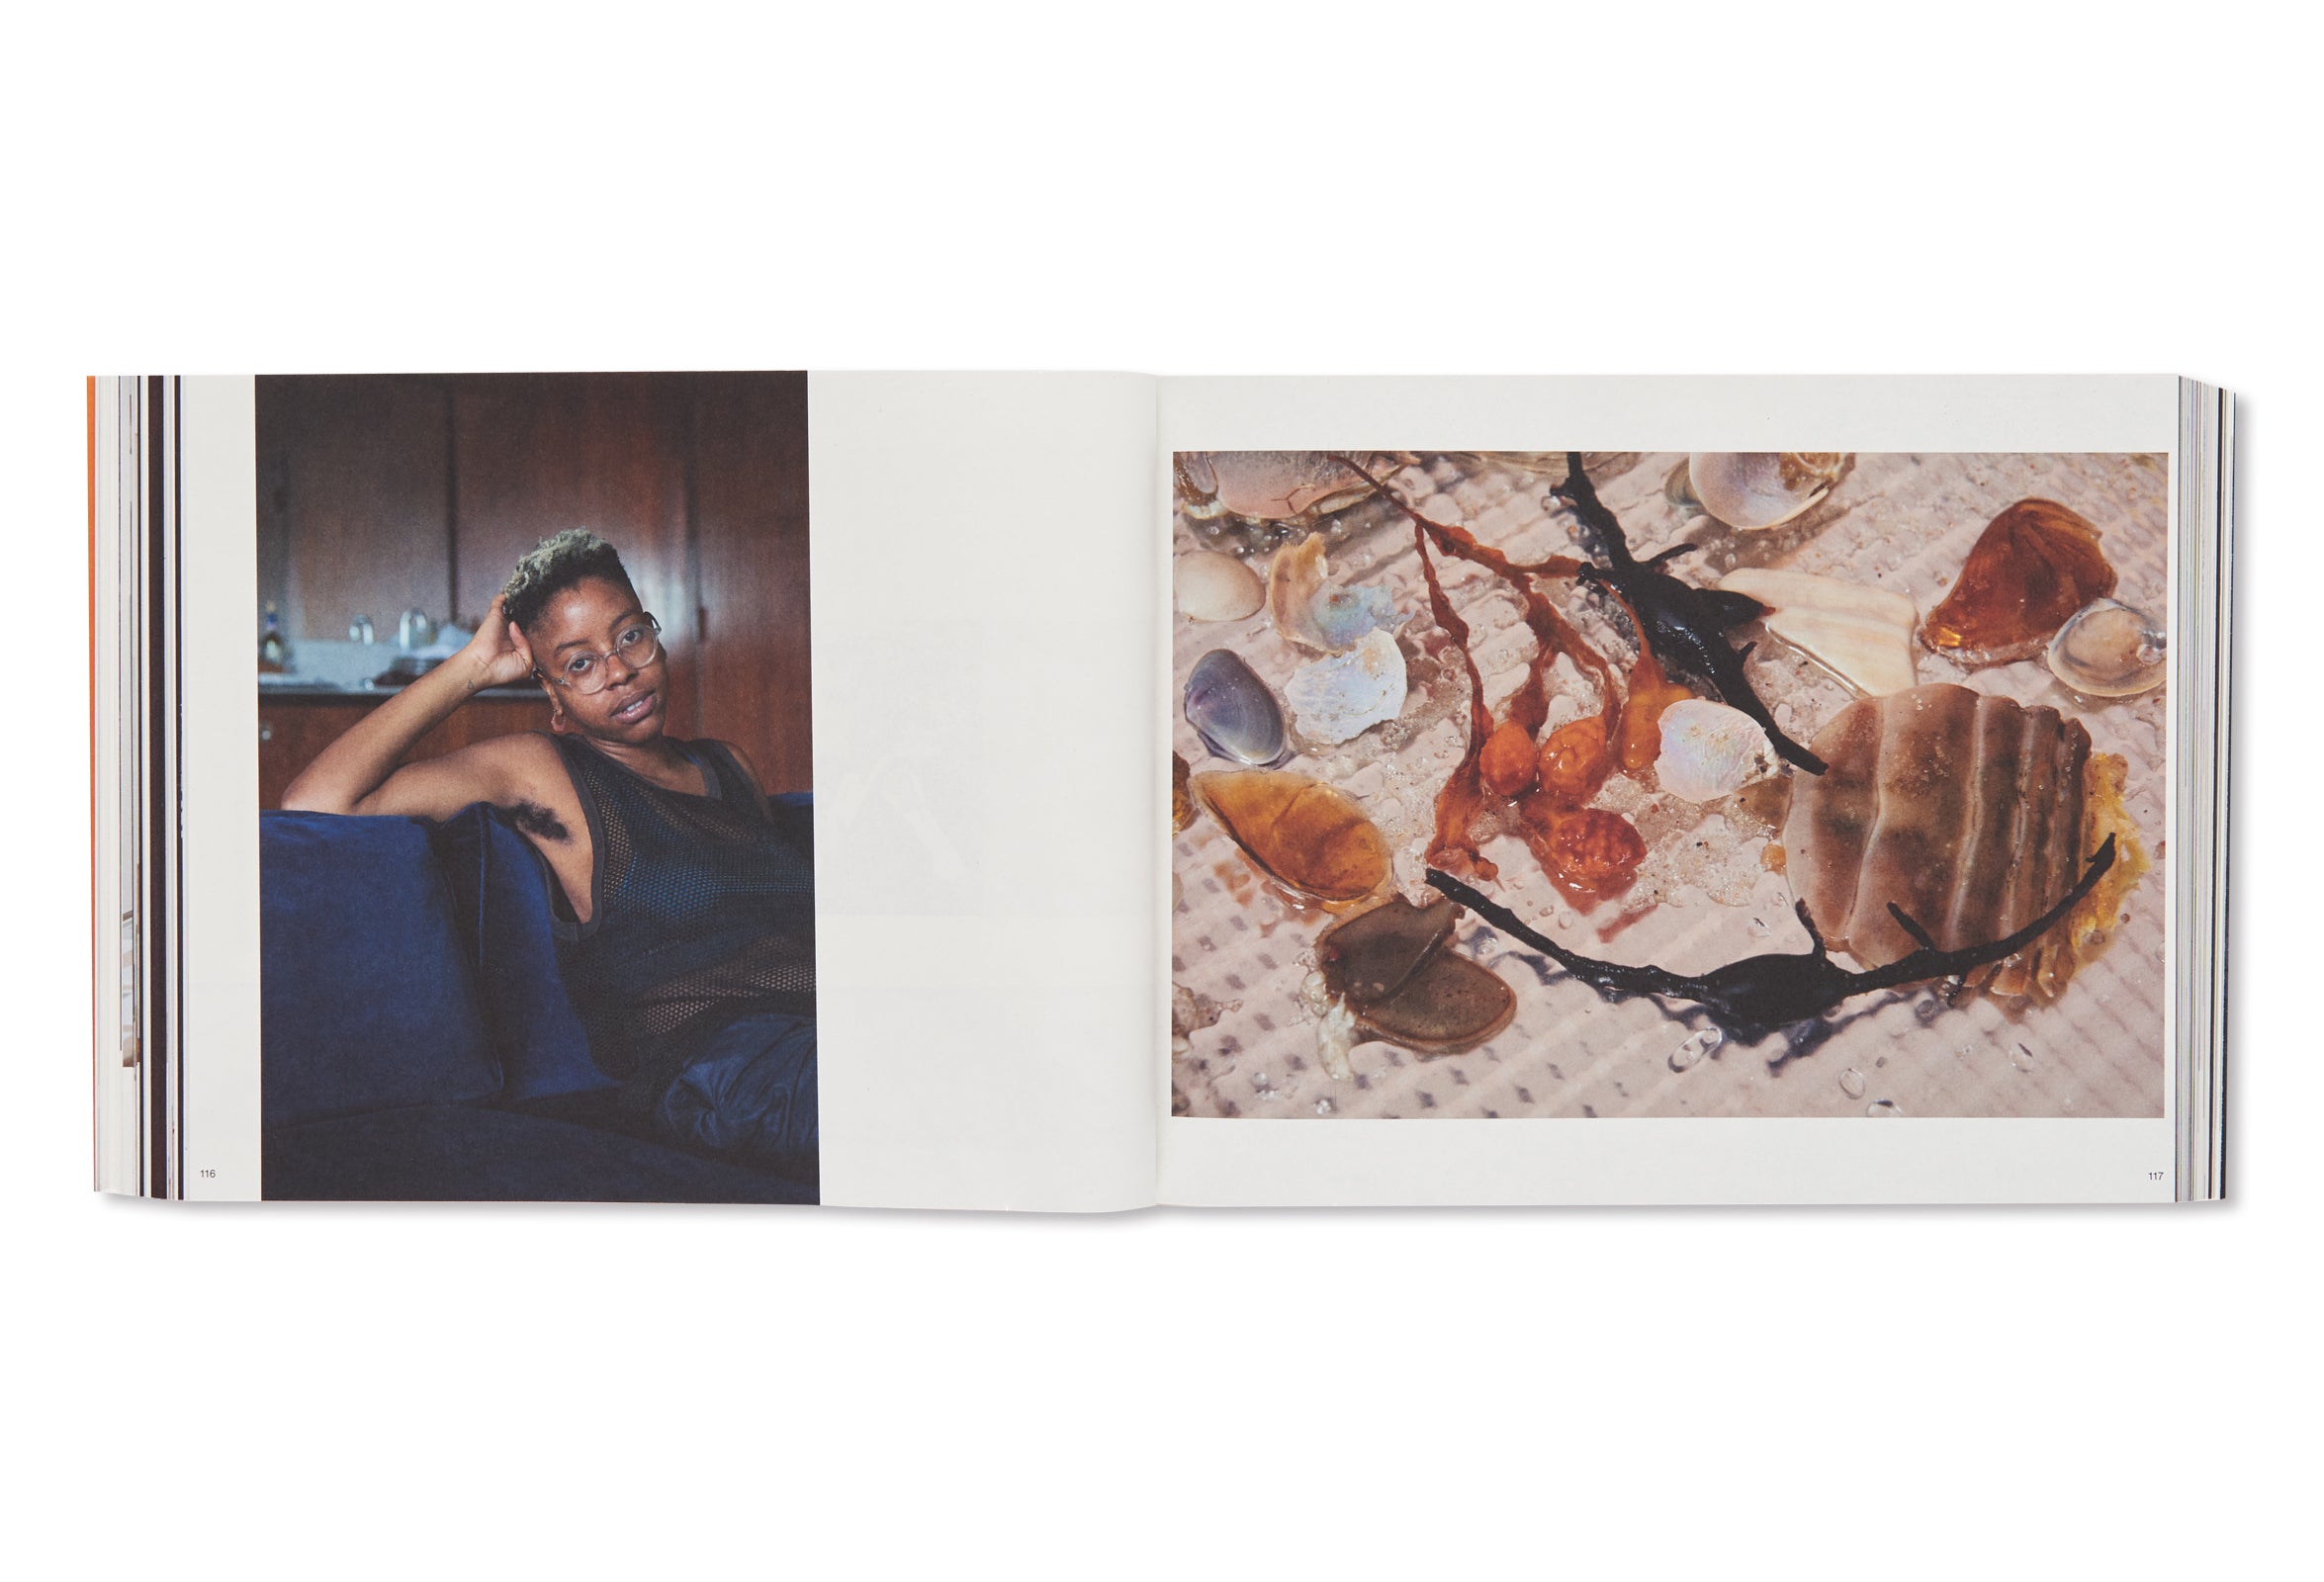 TODAY IS THE FIRST DAY by Wolfgang Tillmans